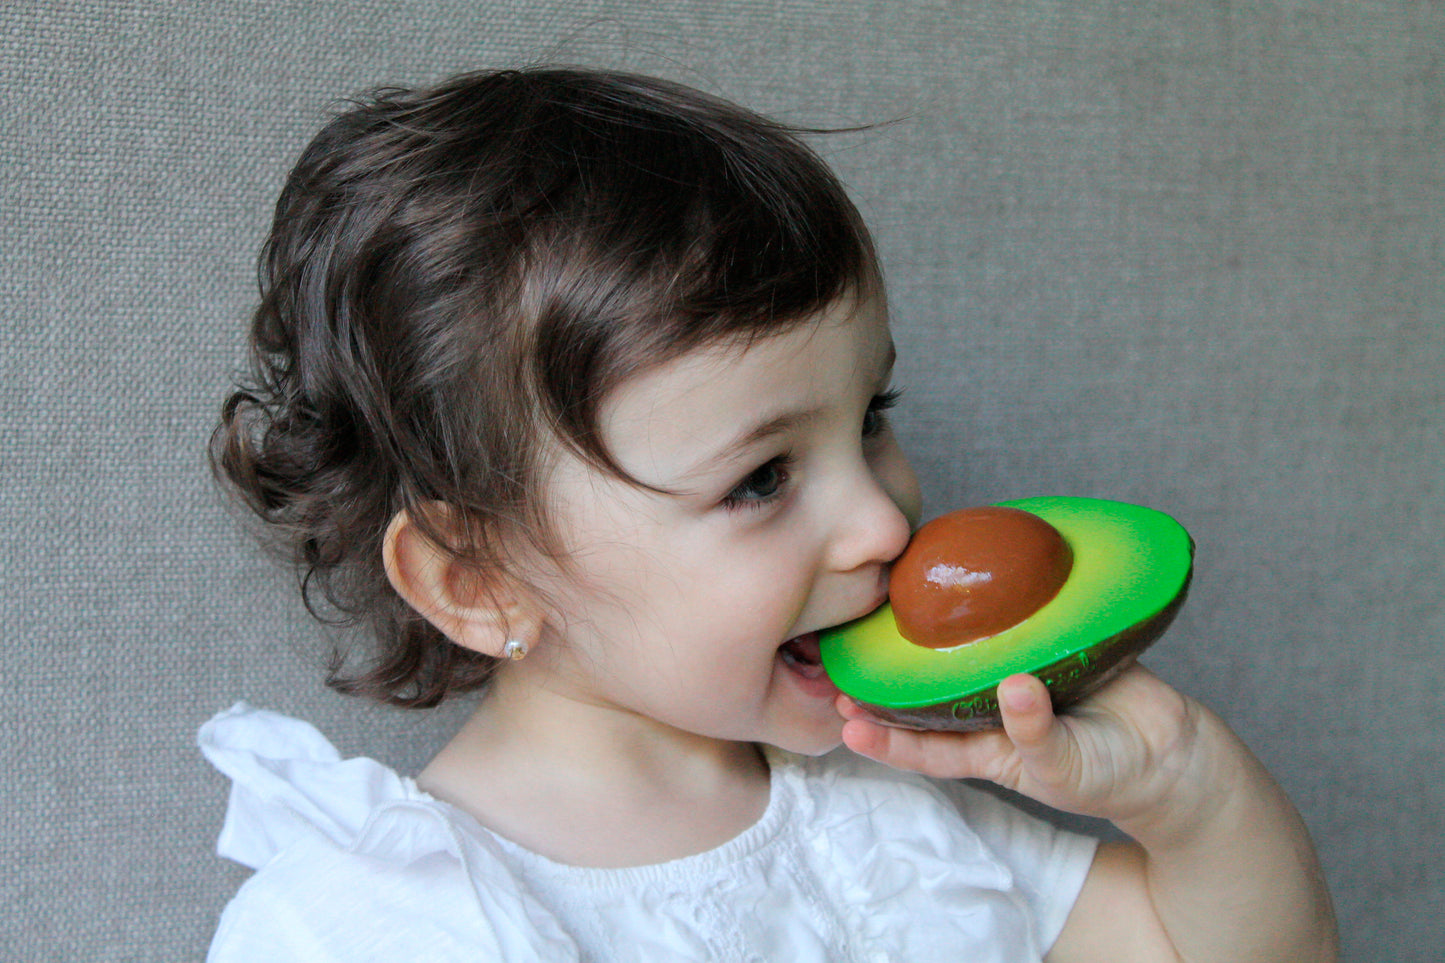 Arnold the Avocado 100% natural rubber teether and bath toy